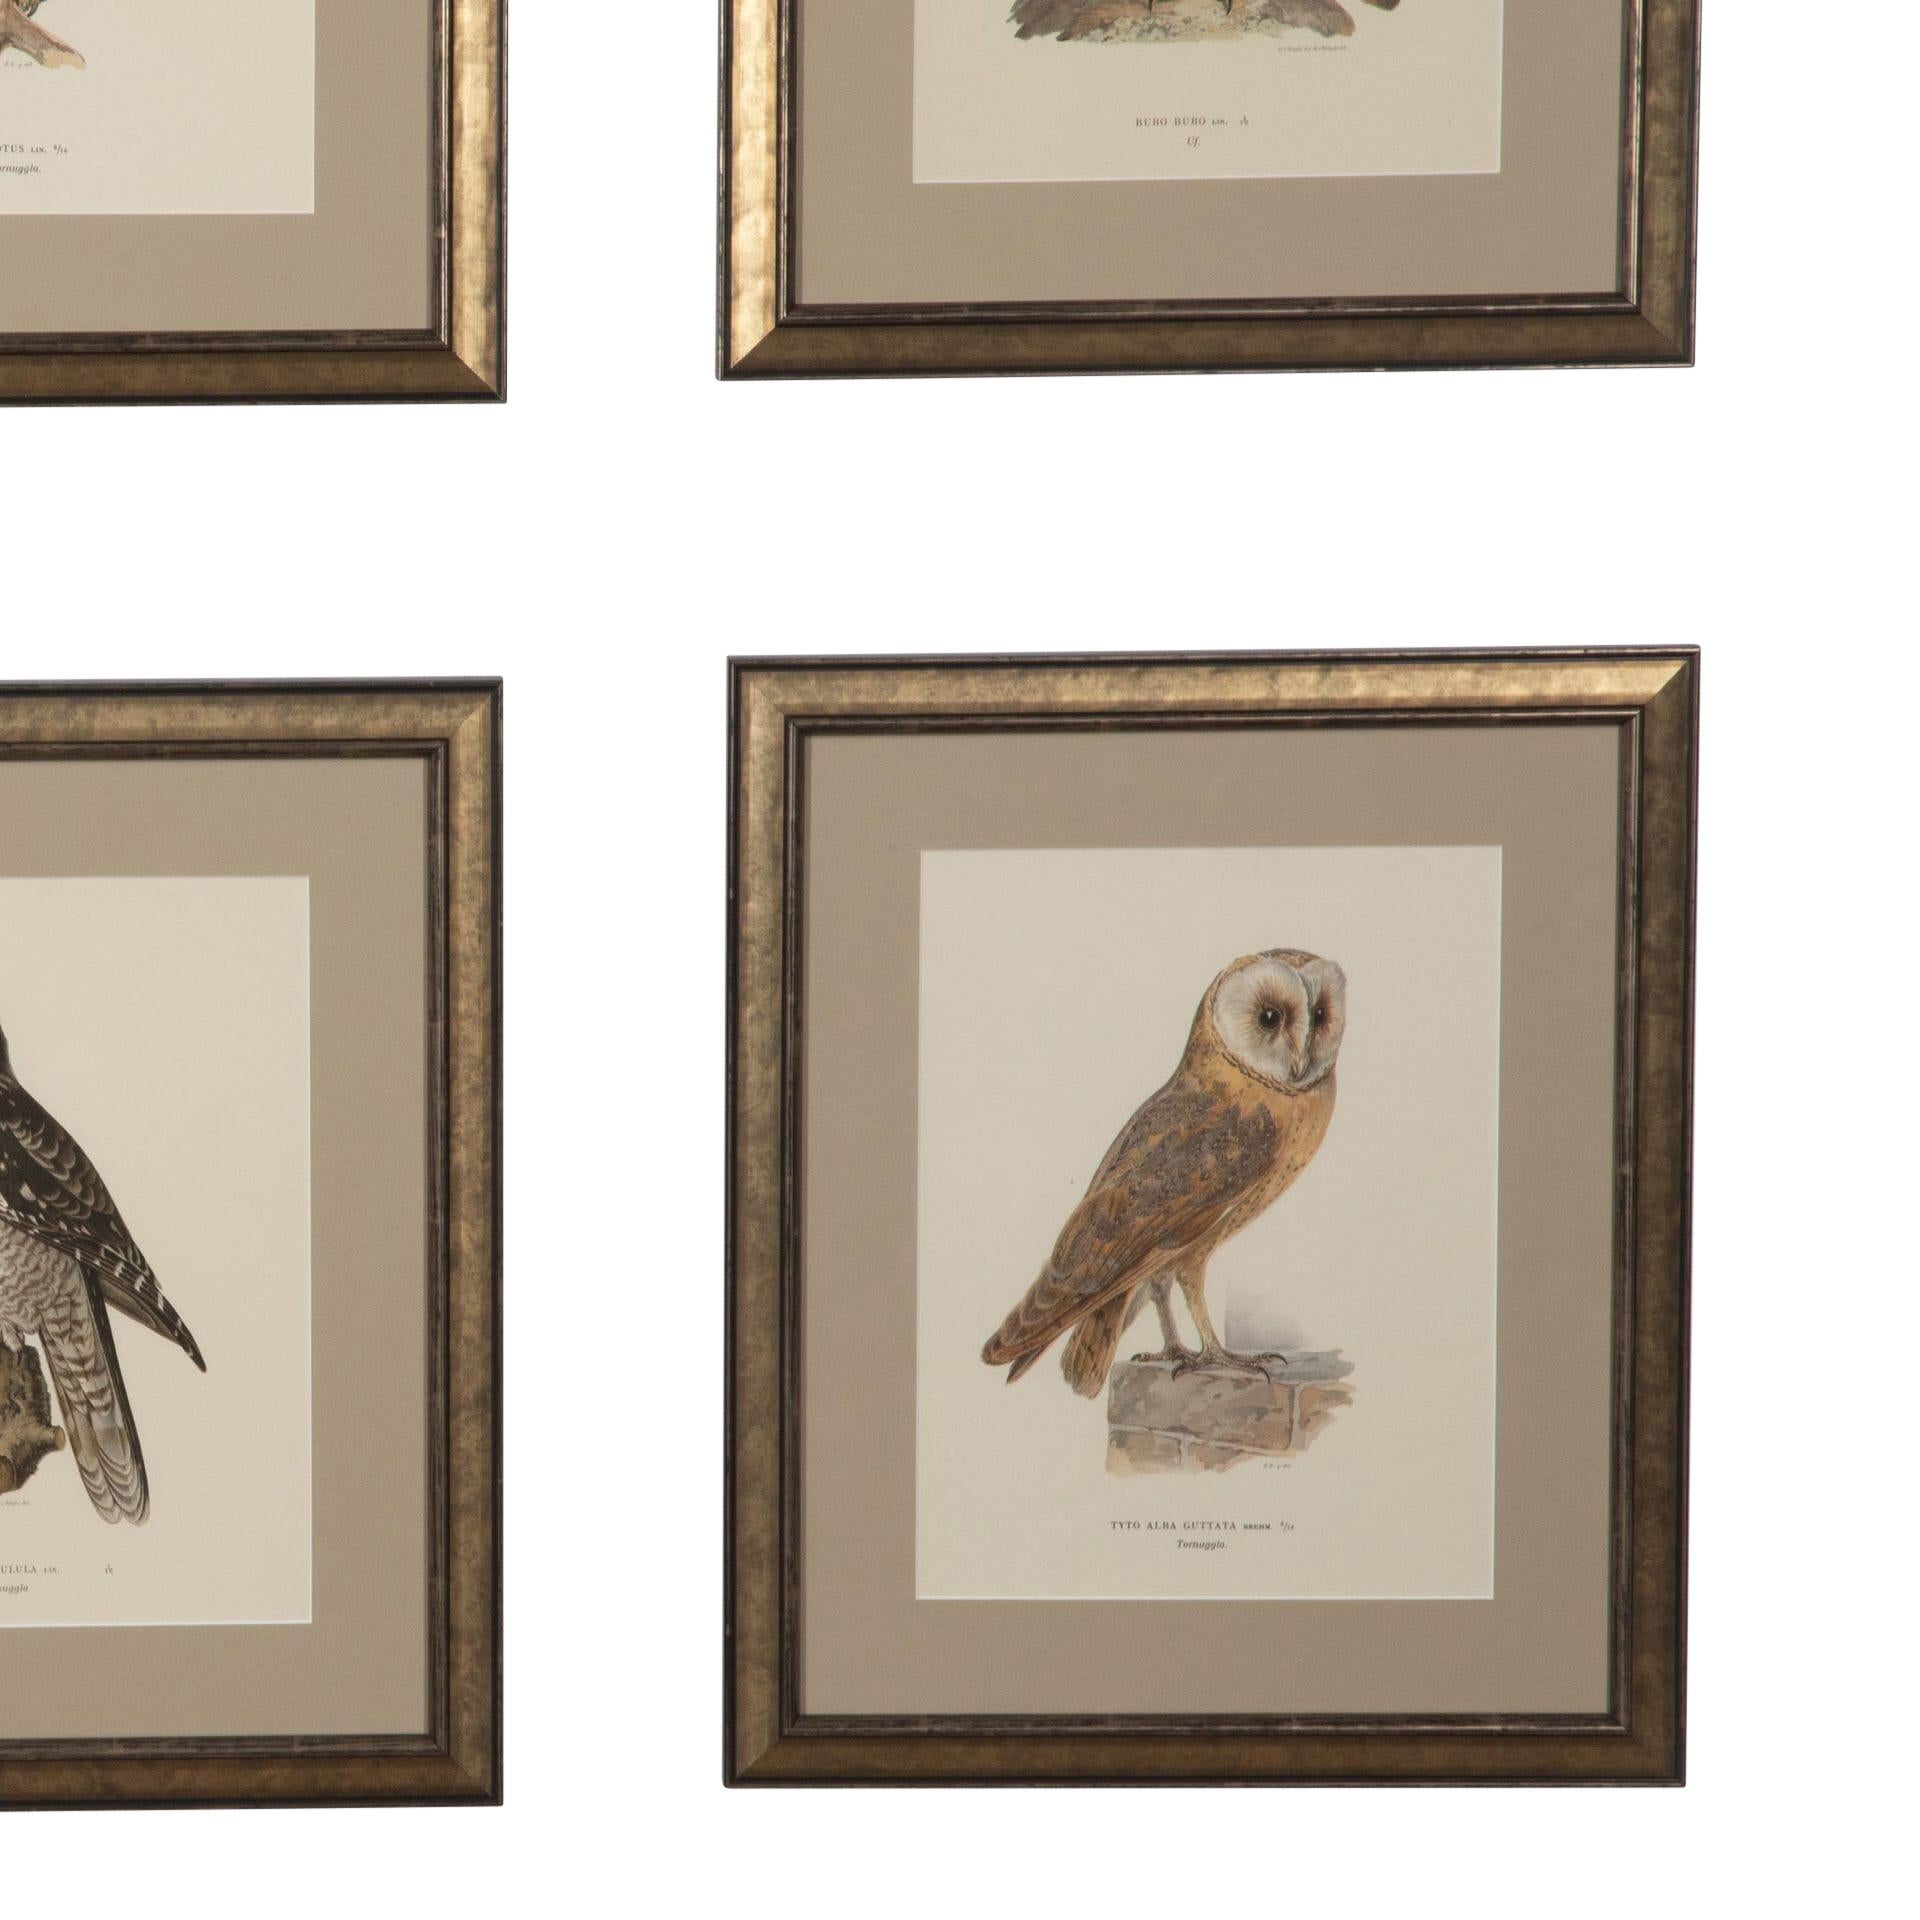 Collection of 19th Century Swedish owl engravings by the Finnish artist, Magnus Von Wright who was a well-known artist and ornithologist.
These engravings capture details and colours not previously seen in their time. 
These colourful